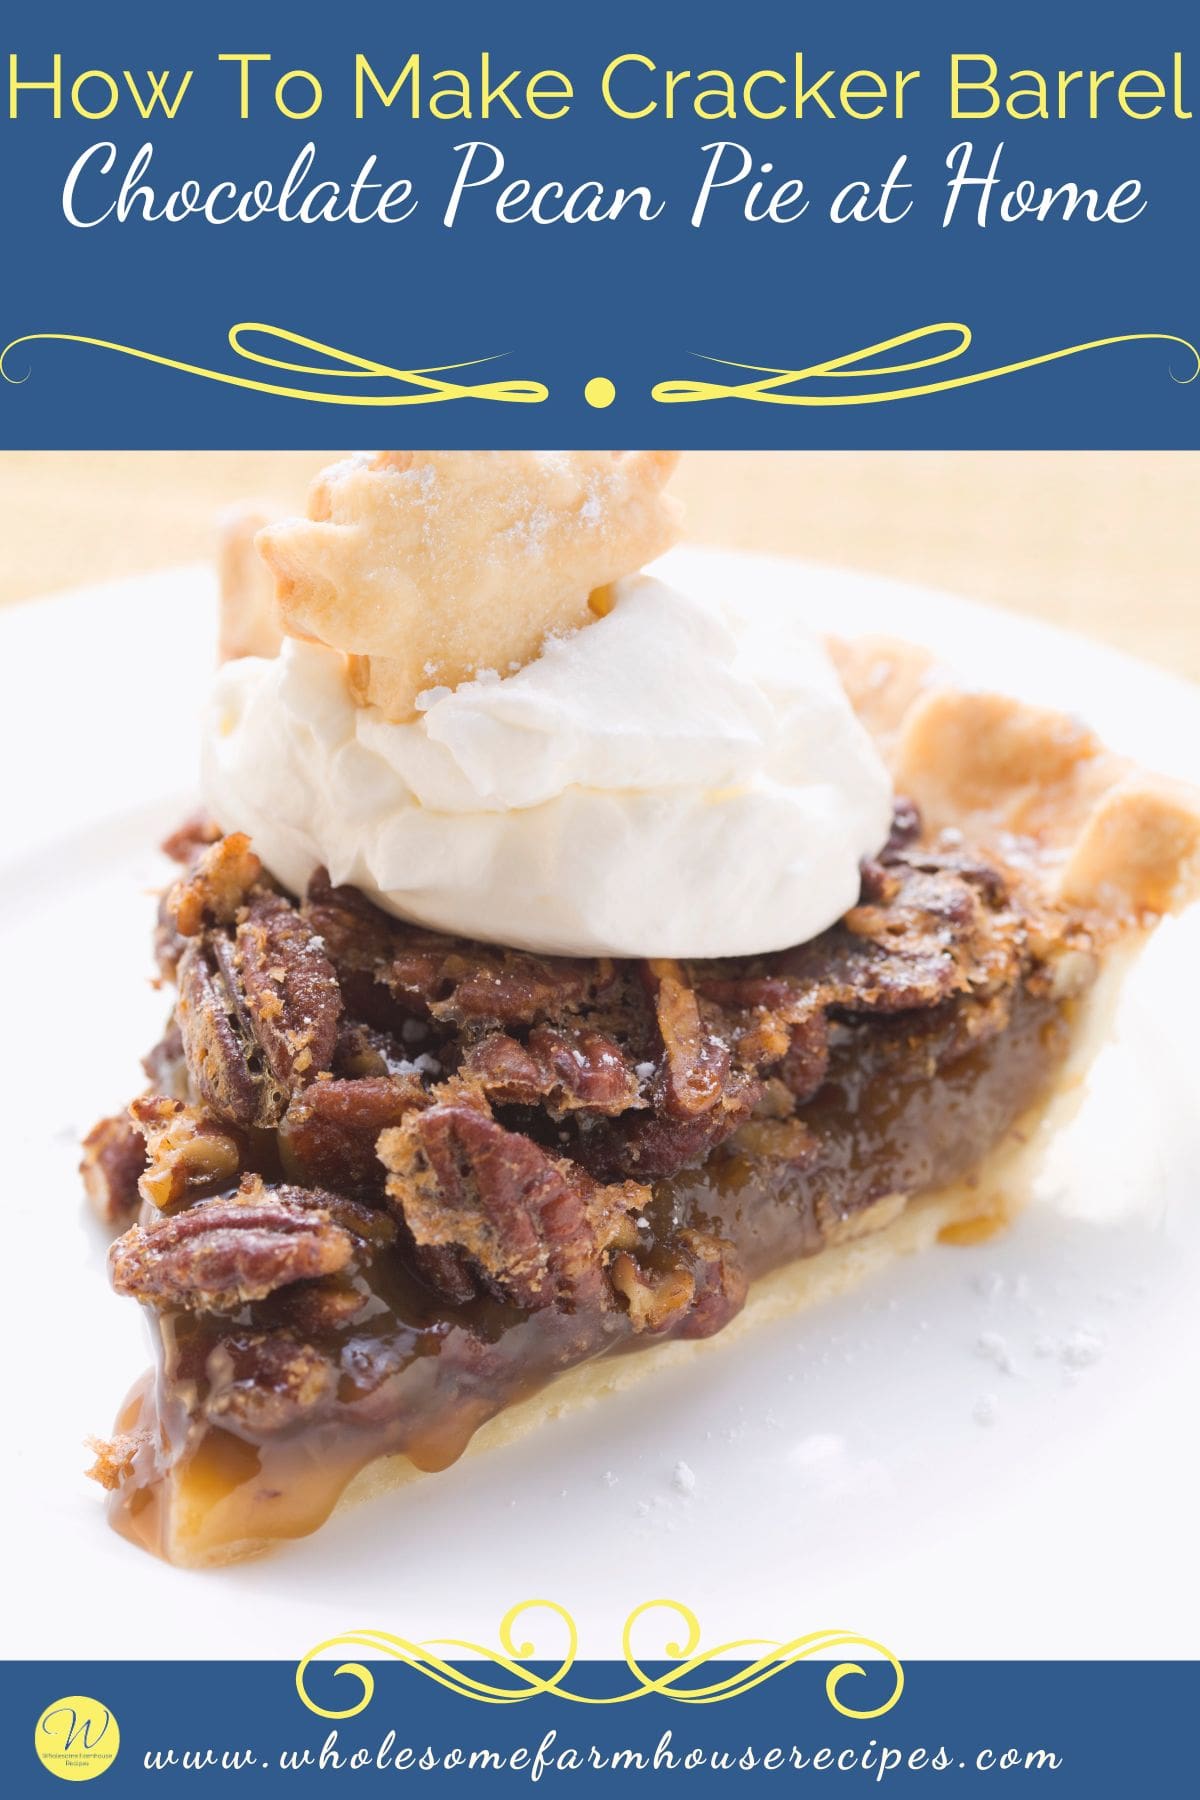 How To Make Cracker Barrel Chocolate Pecan Pie at Home